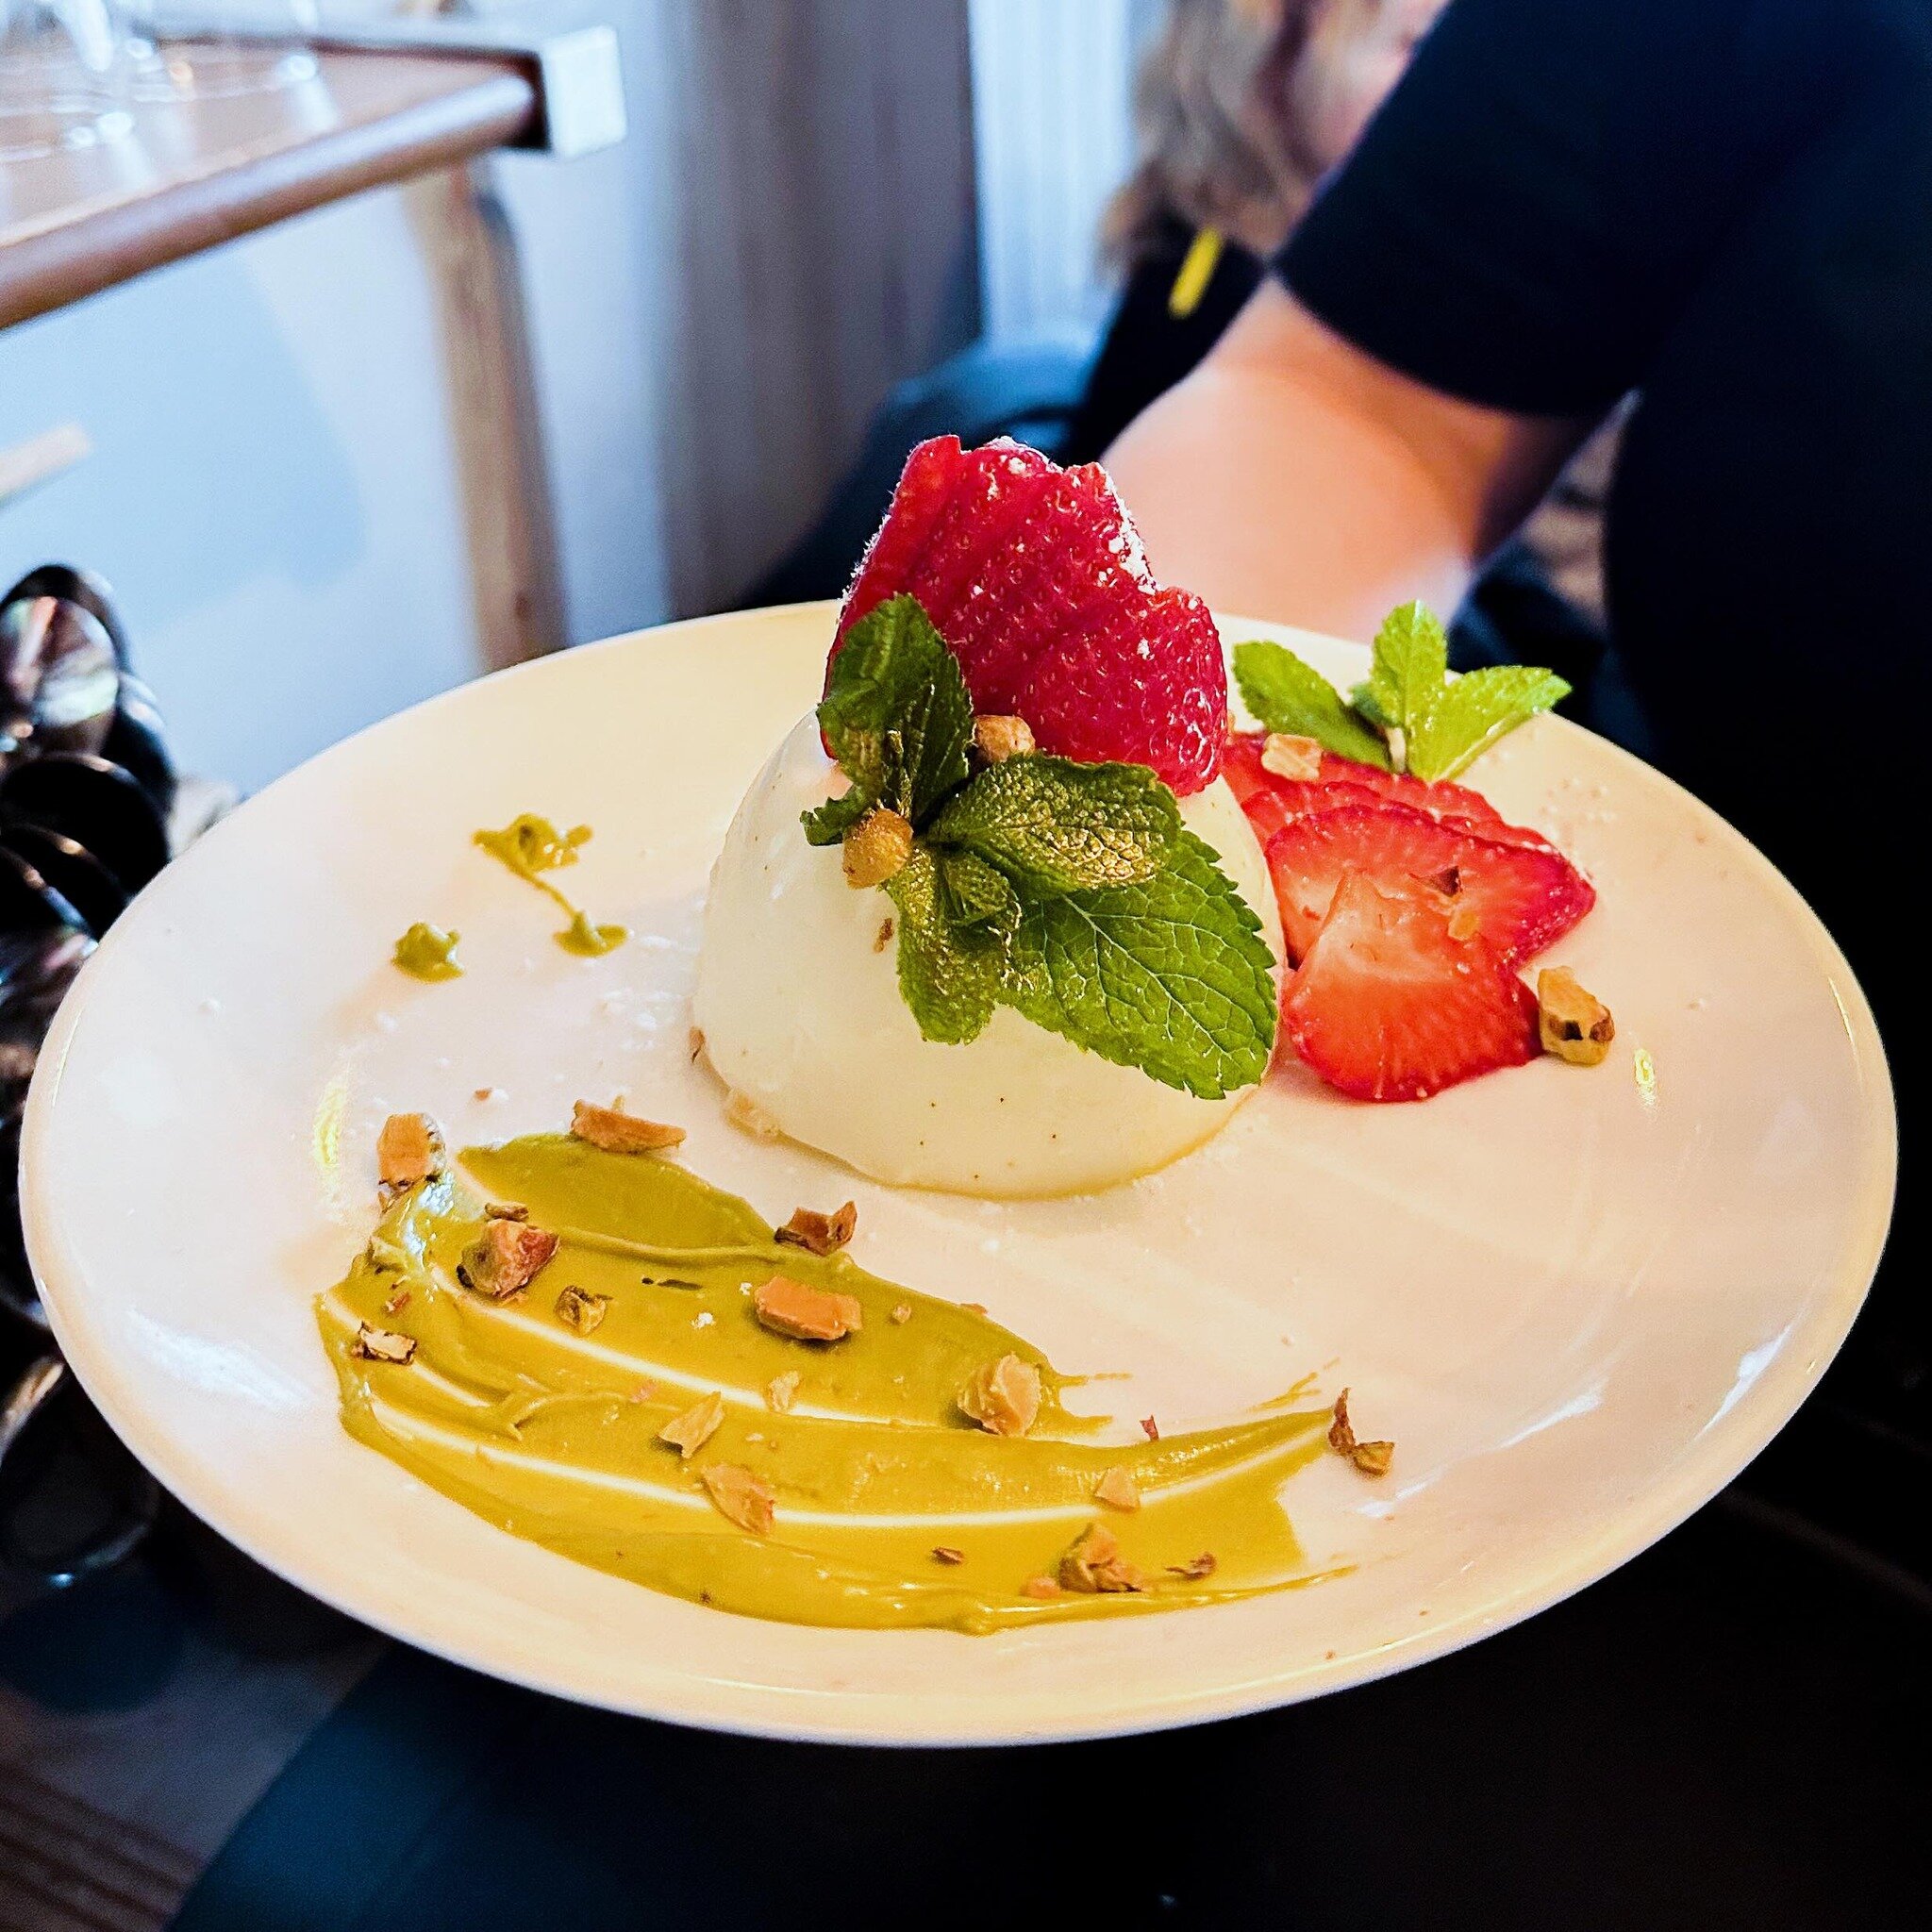 Taste the elegance, embrace the delight and the passion in every bite of our Vanilla Panna cotta served with fresh strawberries and pistachio cream 🤪🤩🍓🤍🍰🌺
#restaurant #cafe #brighton #brightonrestaurant #northlainesbrighton #brightoncafe #brigh